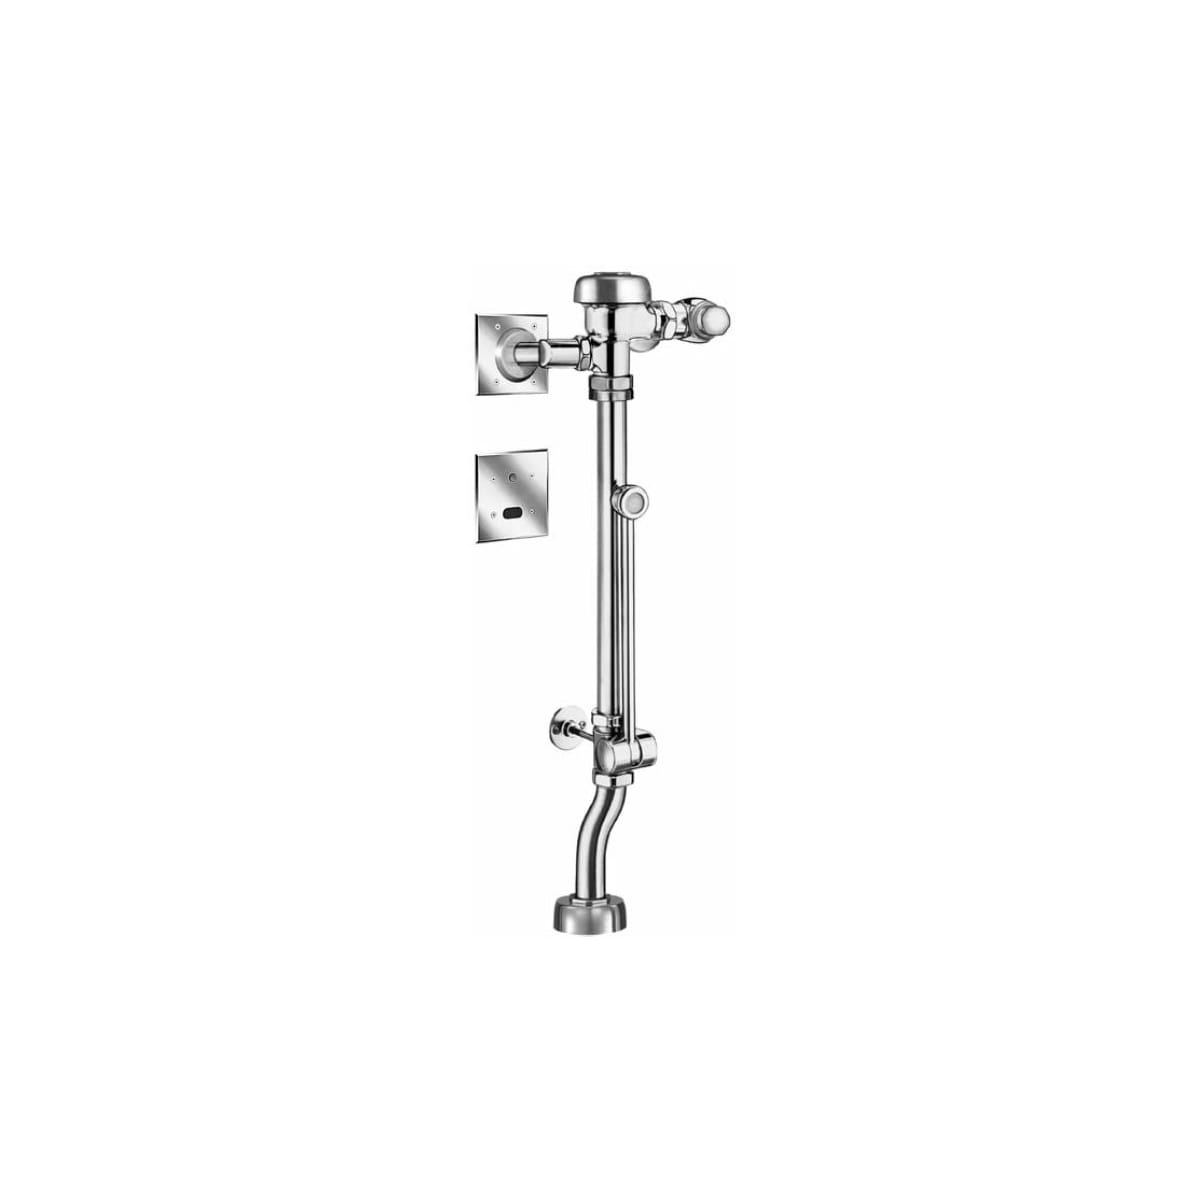 Sloan 3459600 Chrome Royal 1 6 Gpf Ada Touchless Flushometer With